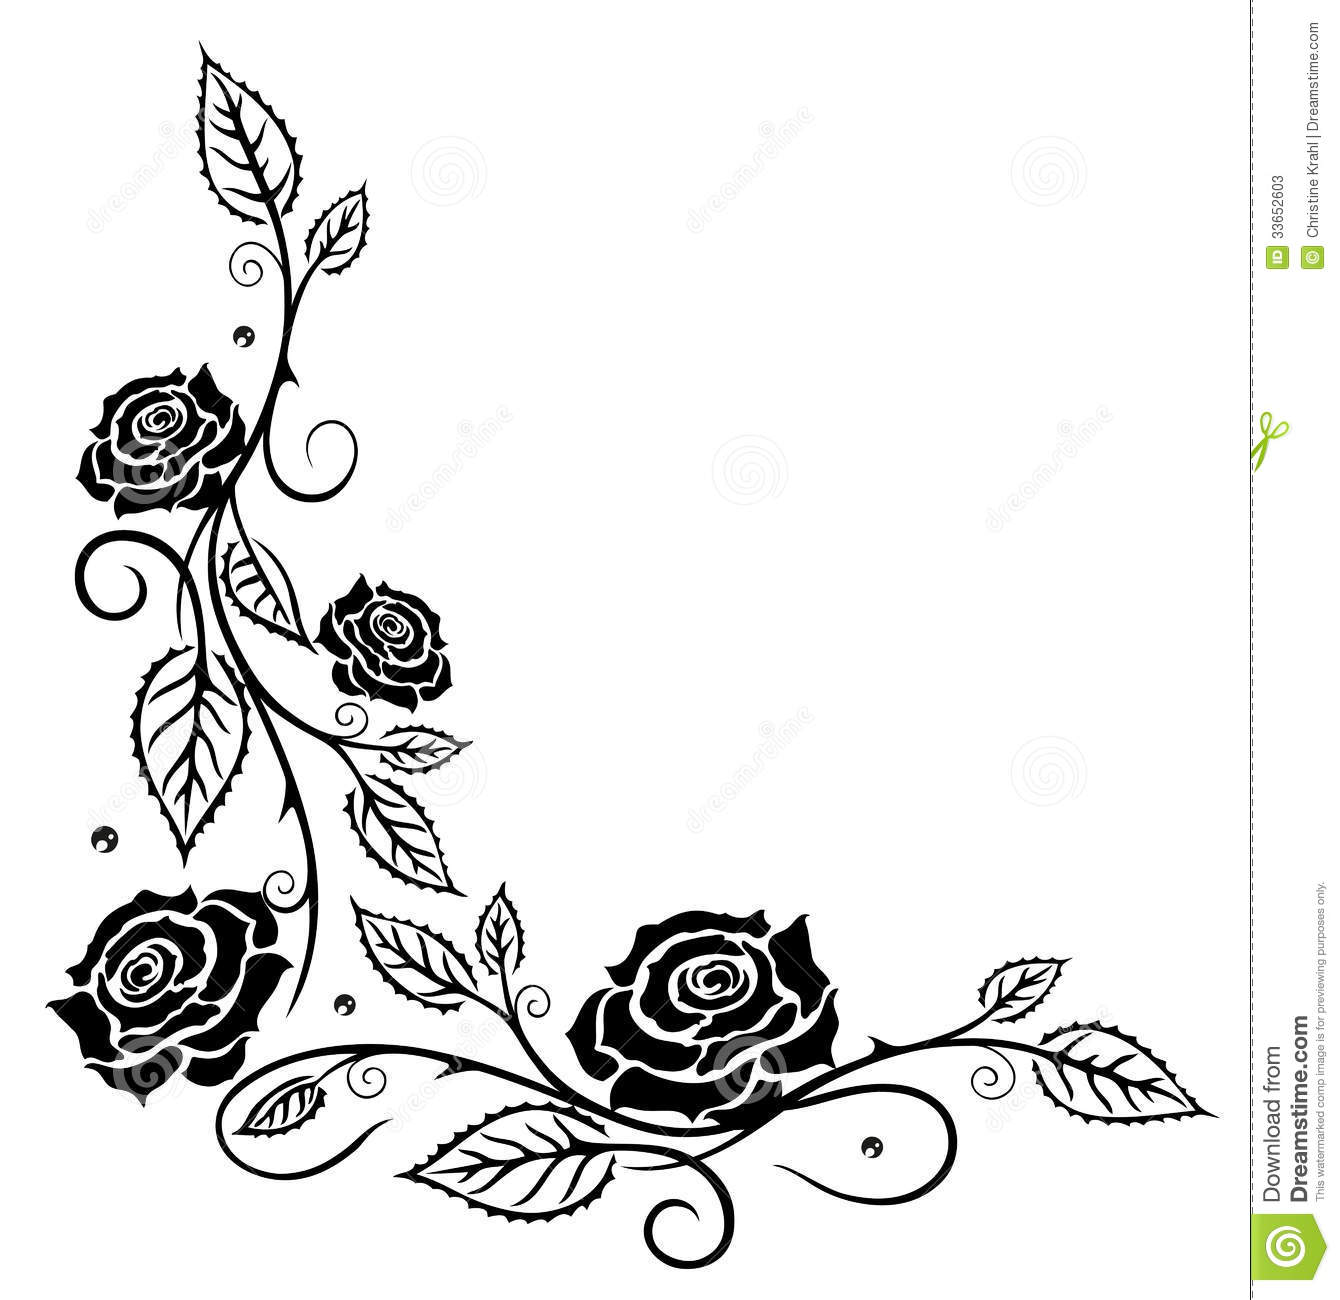 Roses Leaves Flowers Stock Photos   Image  33652603